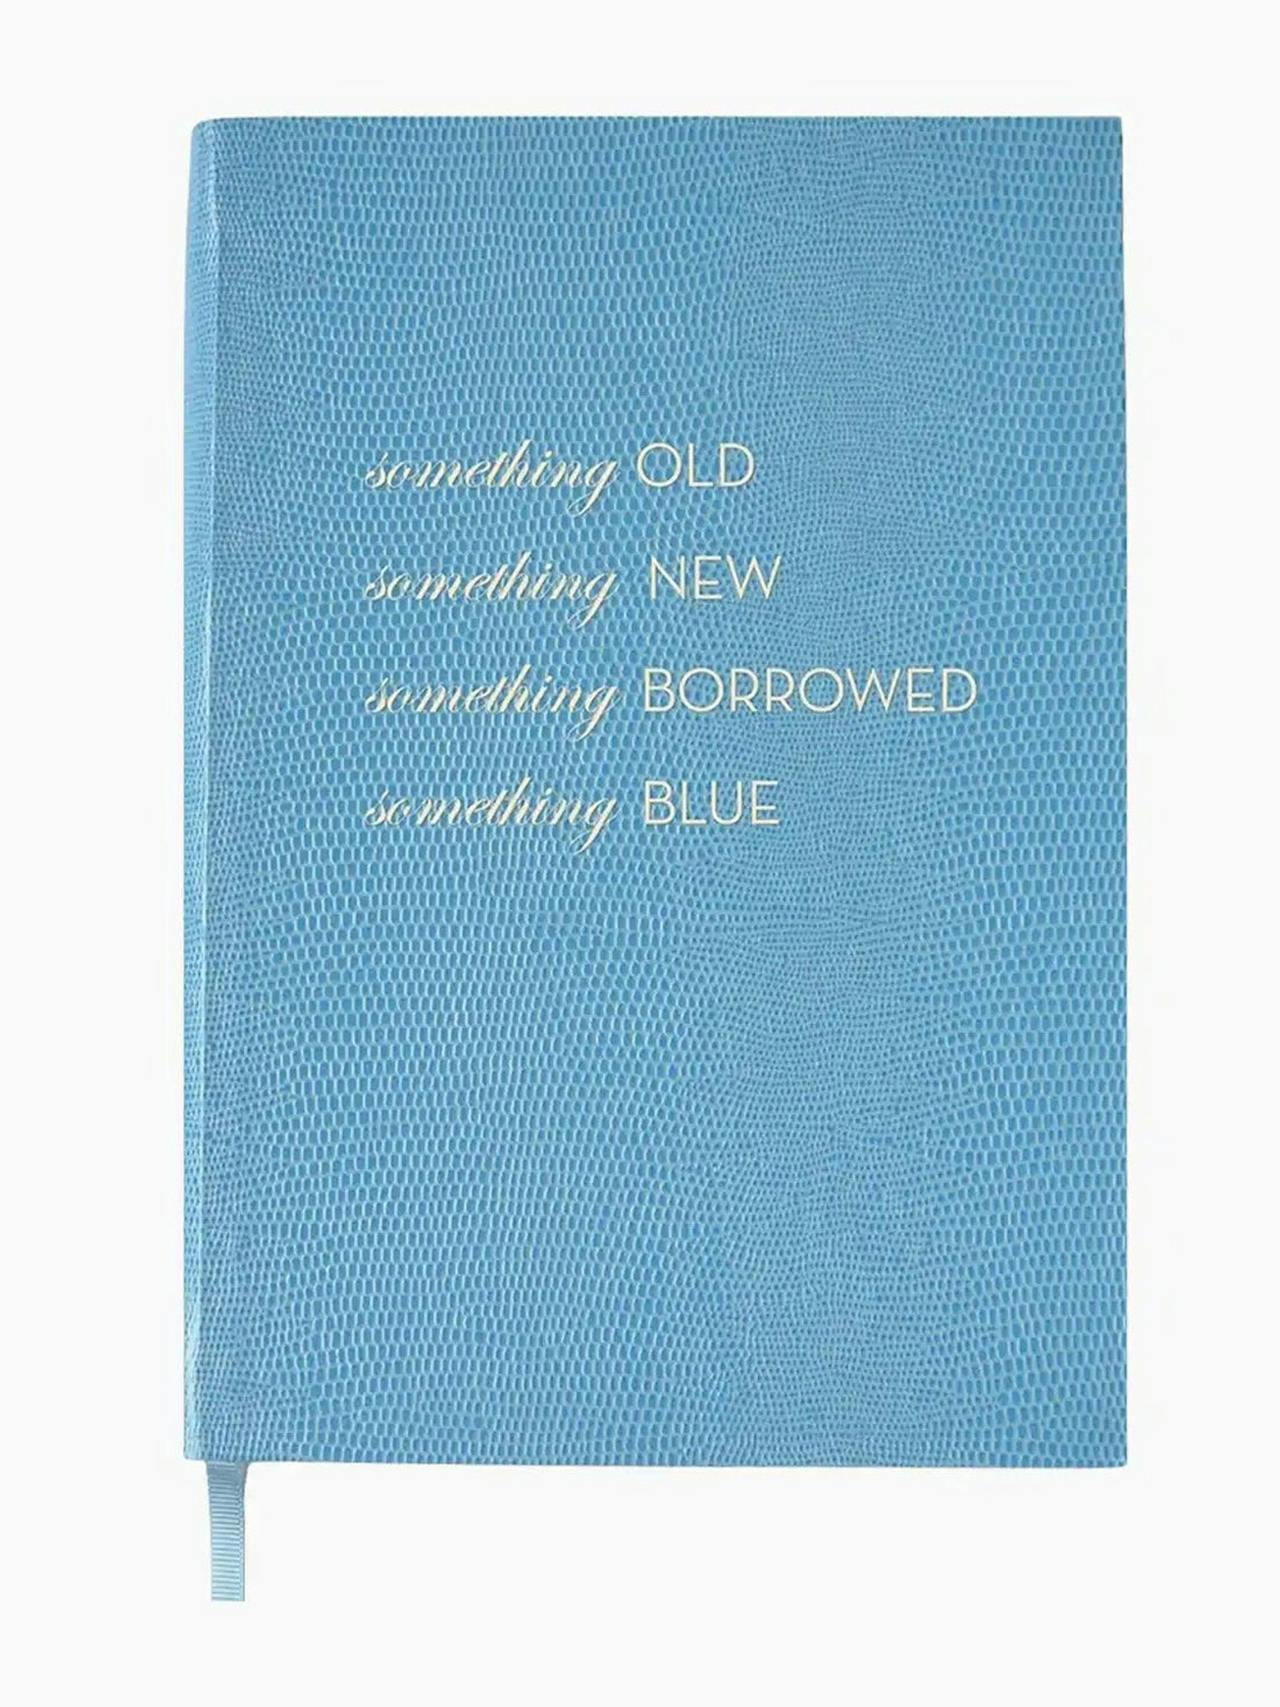 Something Old, New, Borrowed, blue notebook